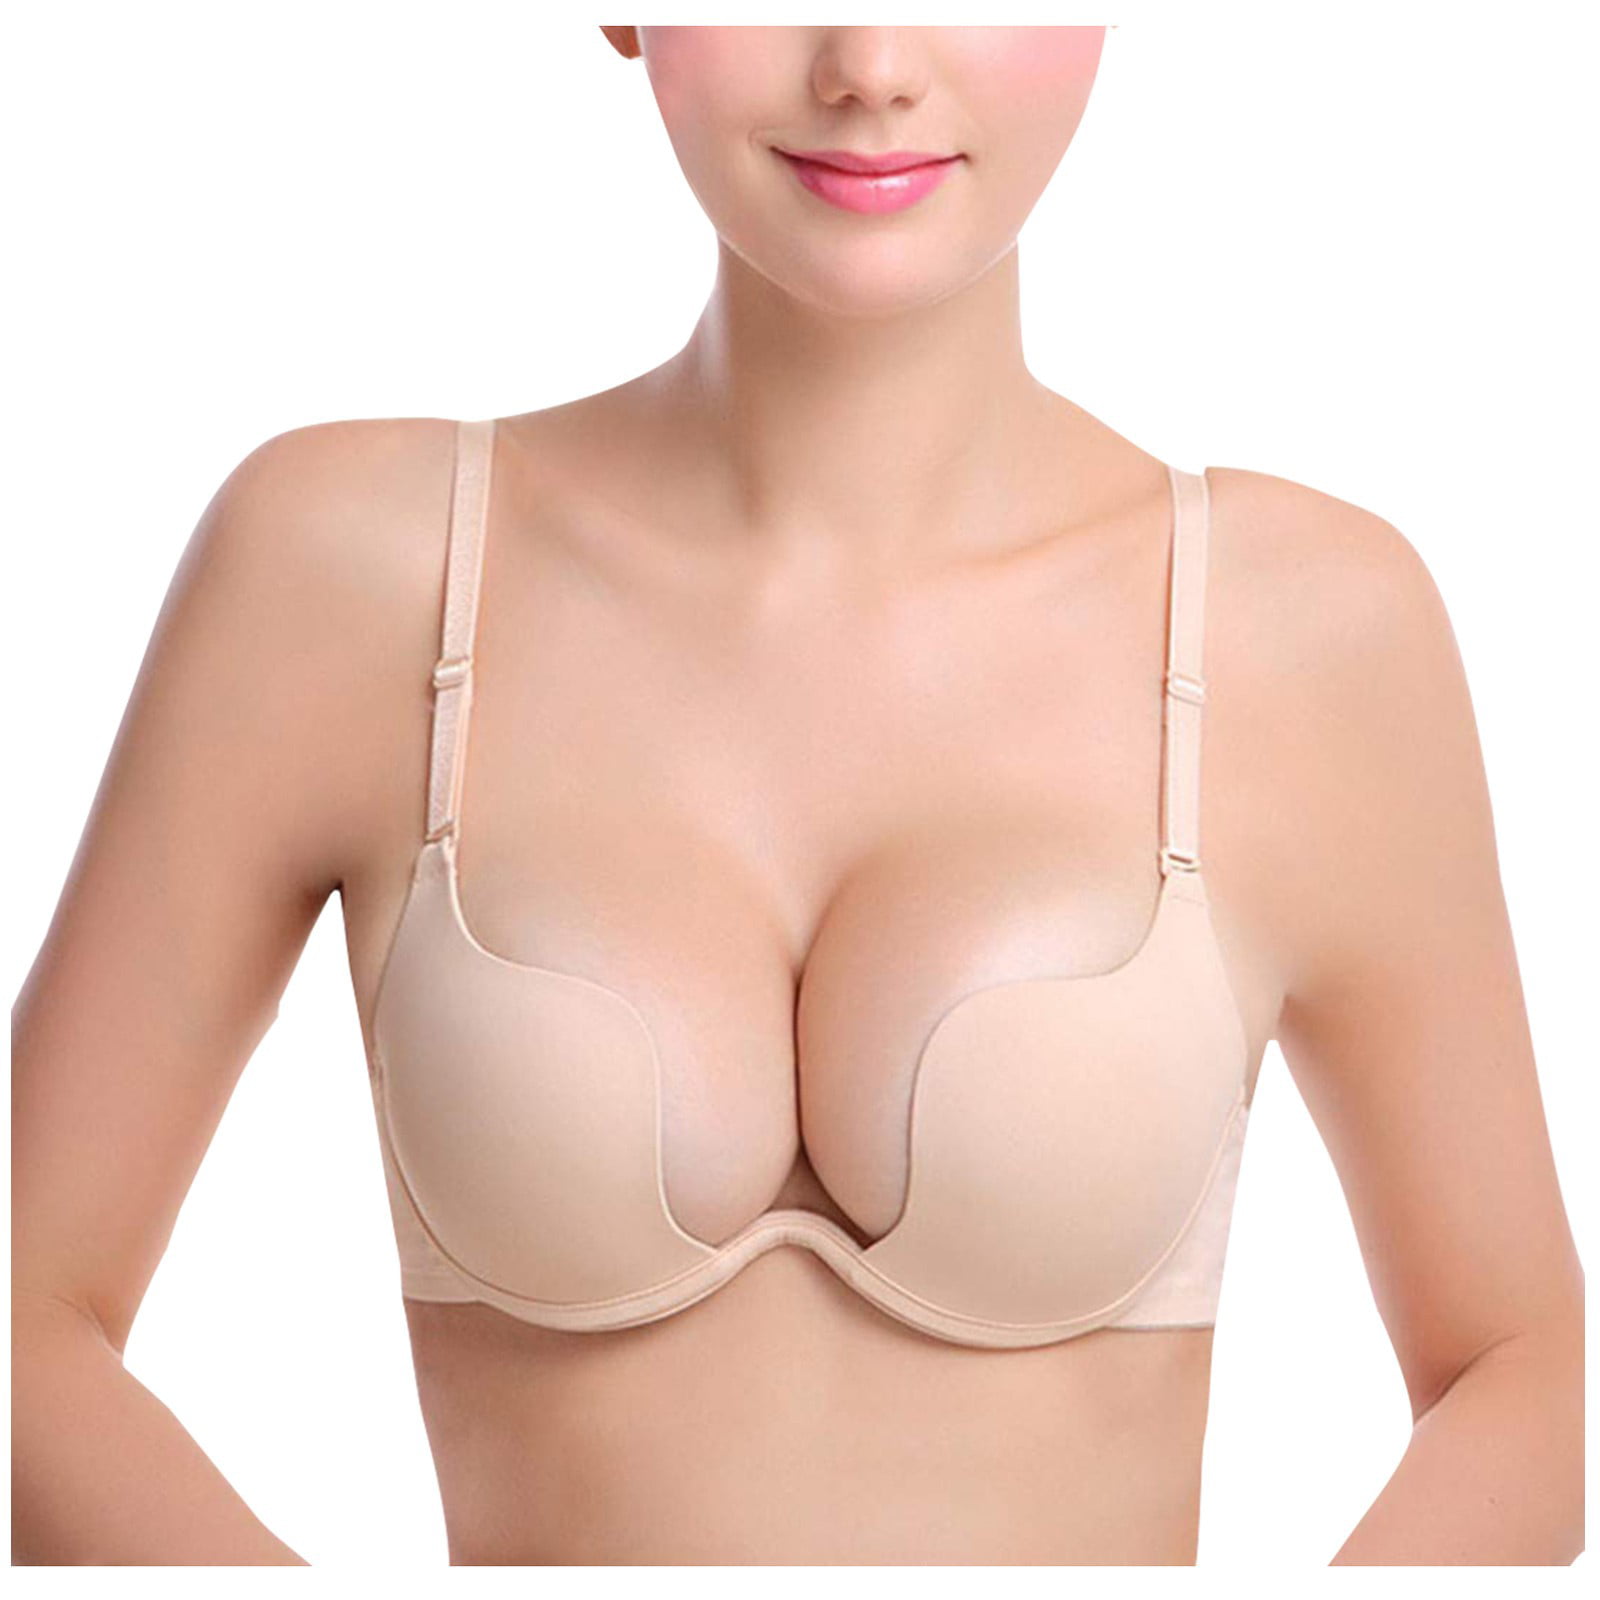 Knosfe Tshirt Bra Convertible Push Up Plus Size Bra Deep Plunge Solid Color  Underwire Bra 